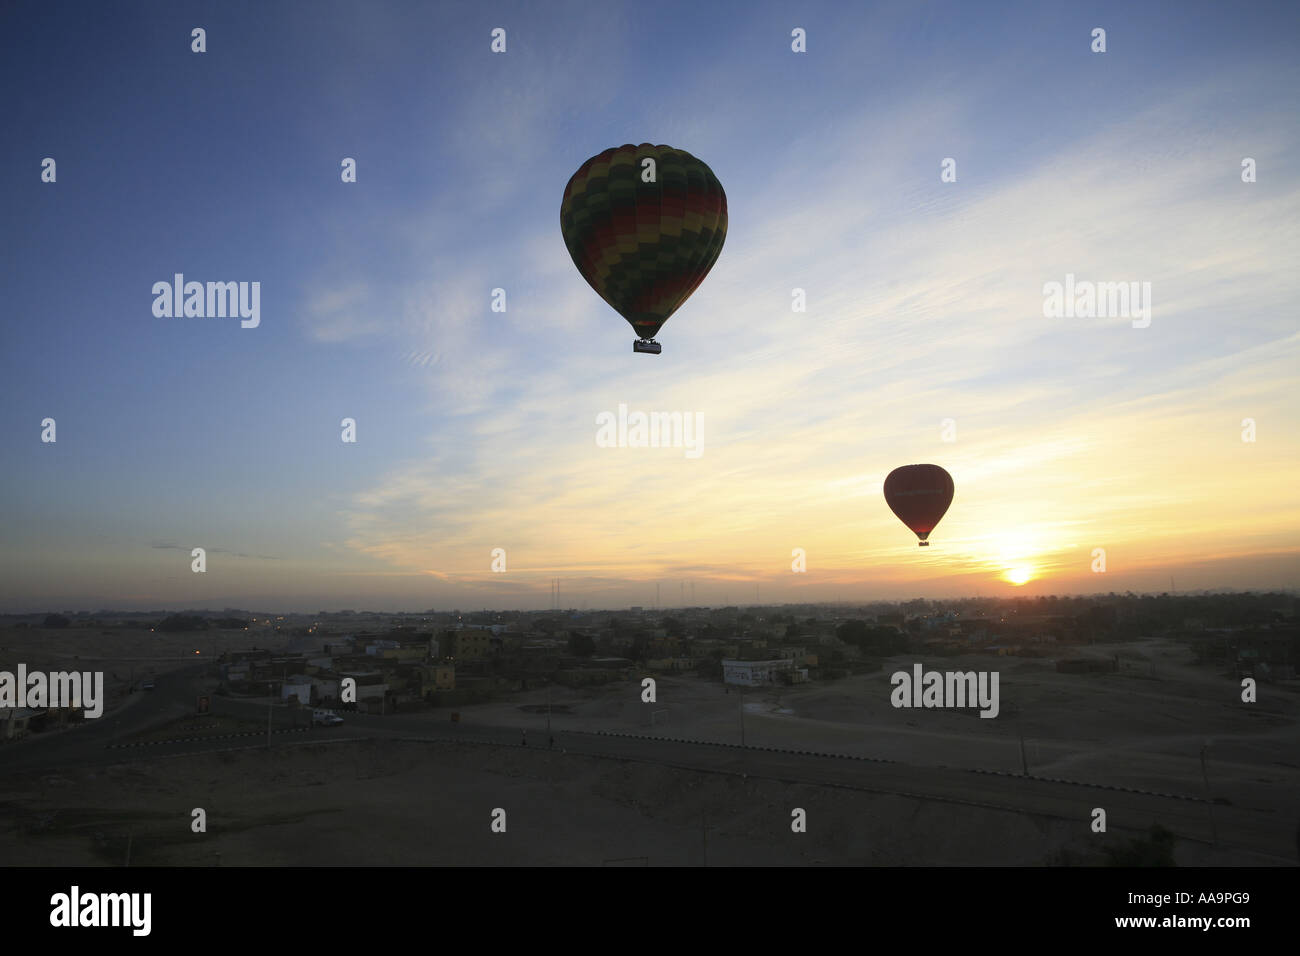 Hot Air Ballooning over fields, villages and ancient monuments in Egypt Stock Photo